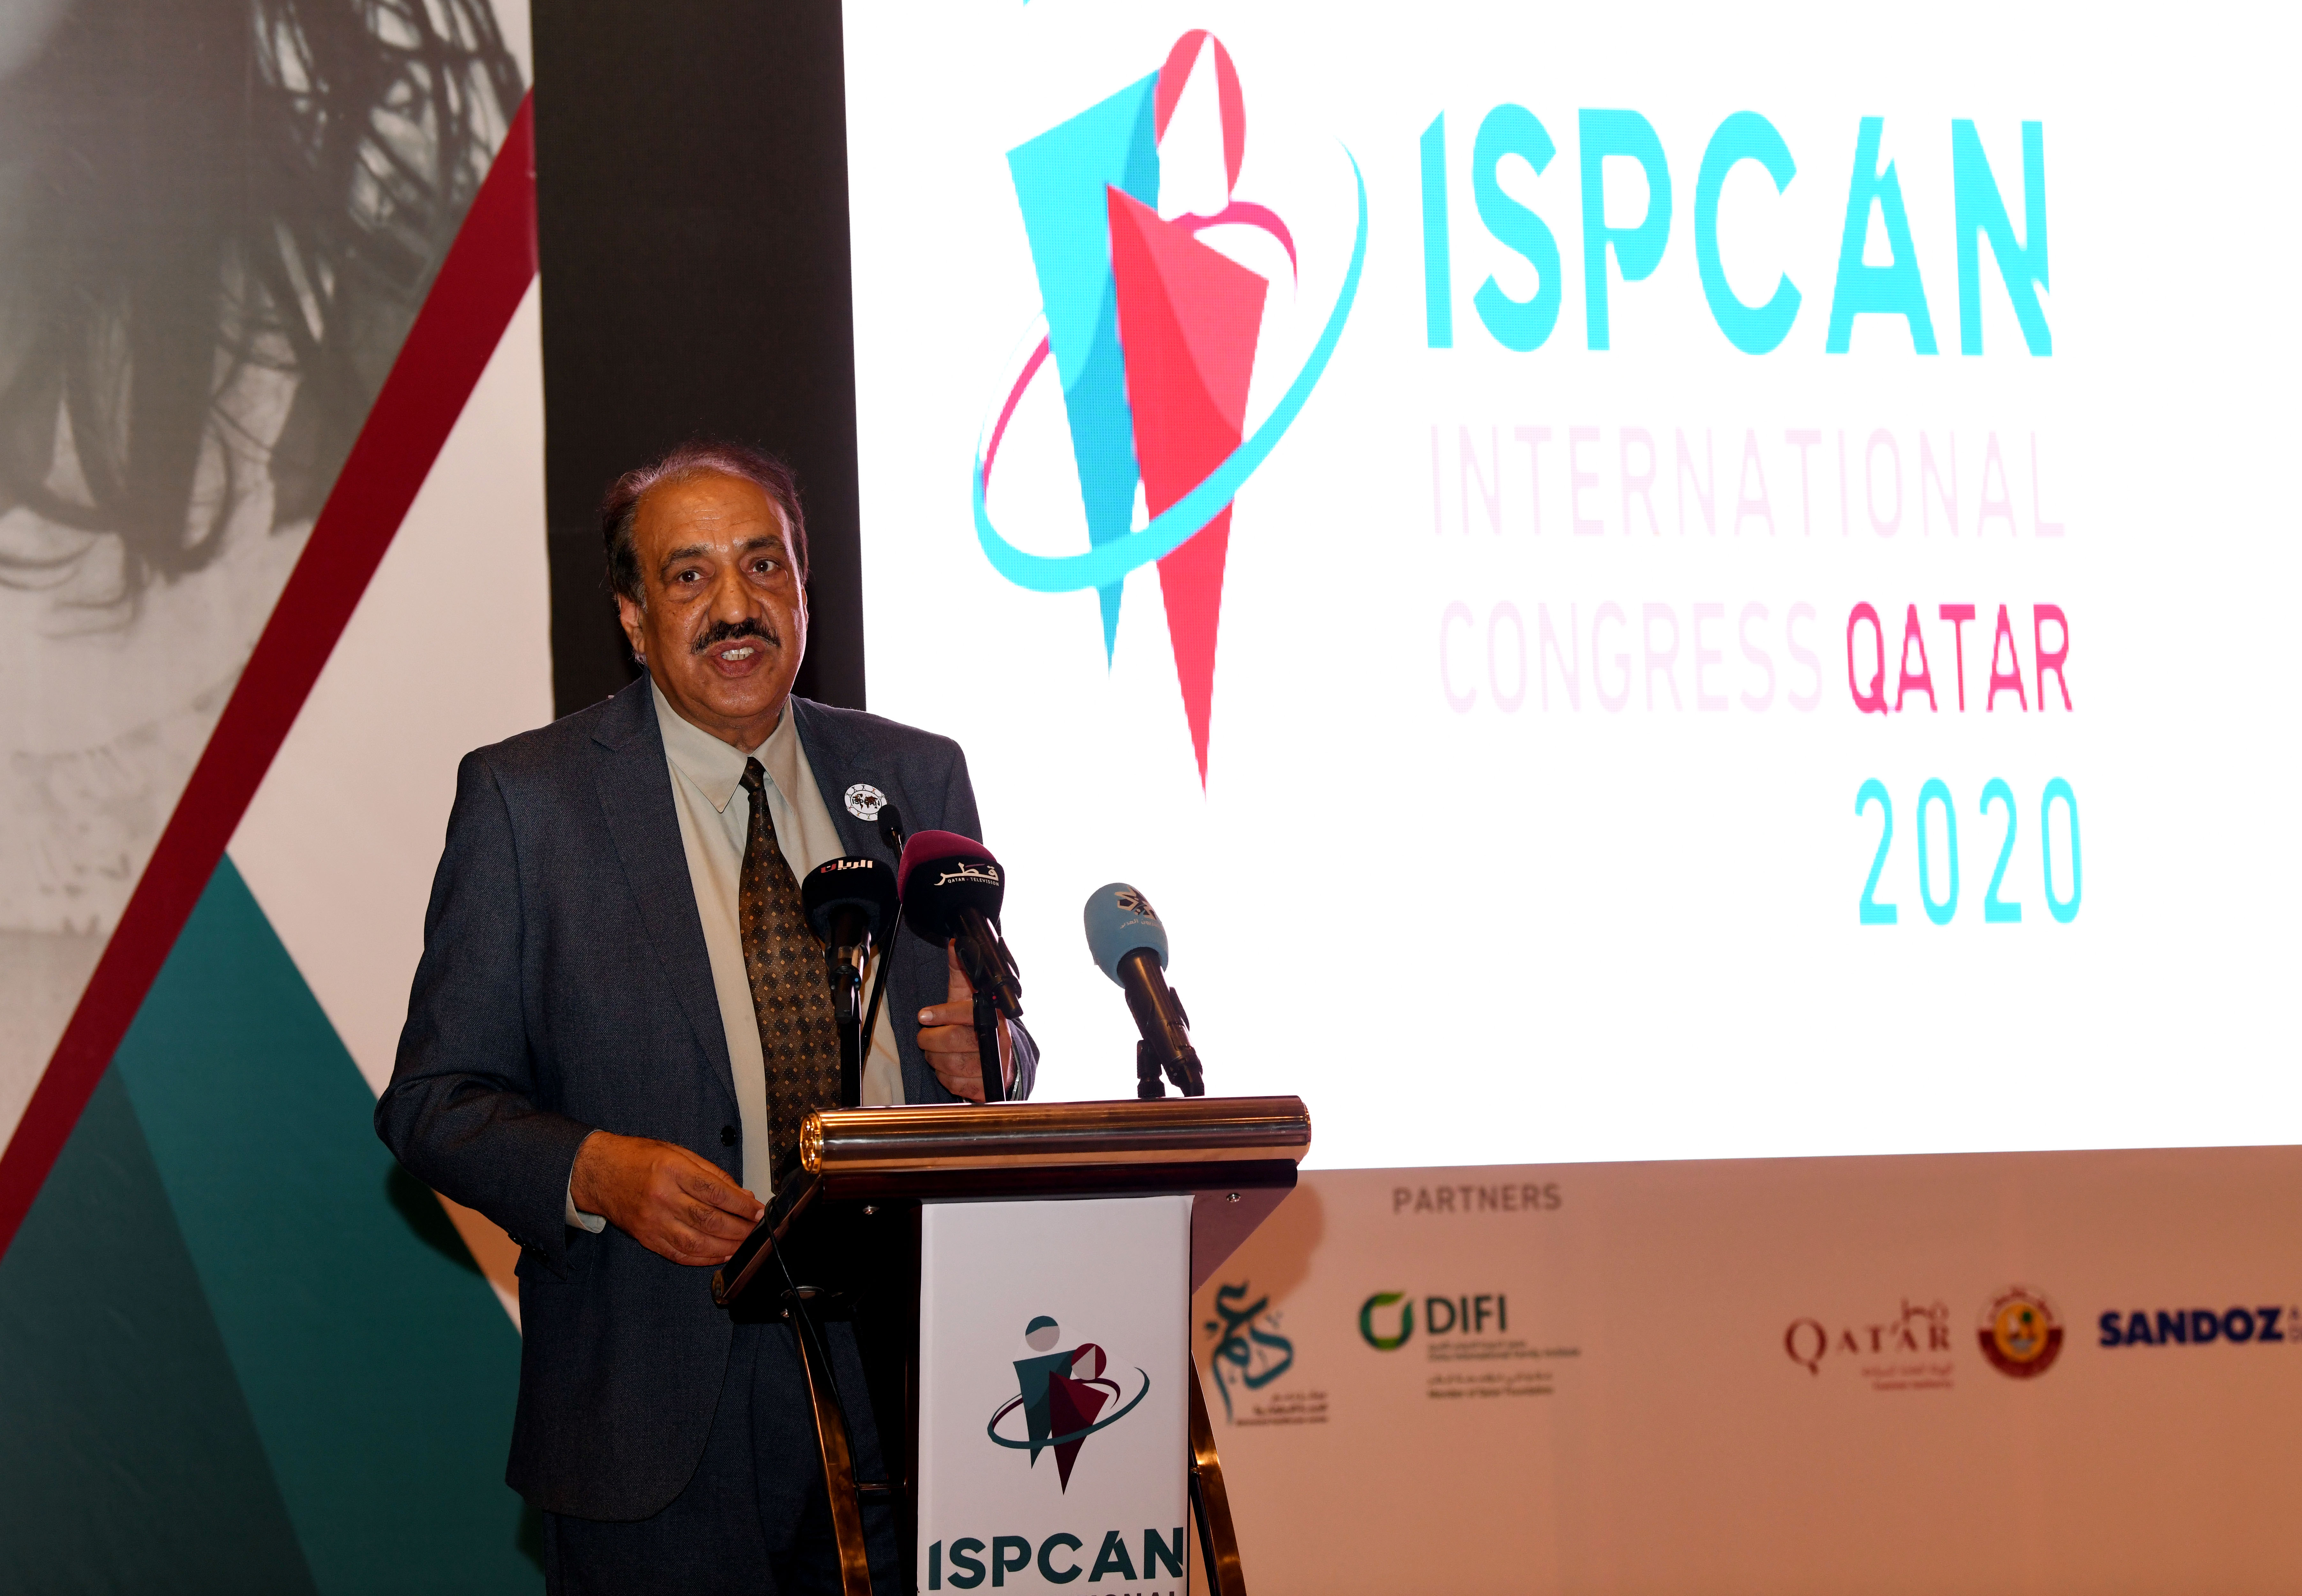 Dr. Tufail Mohammed - President of ISPCAN